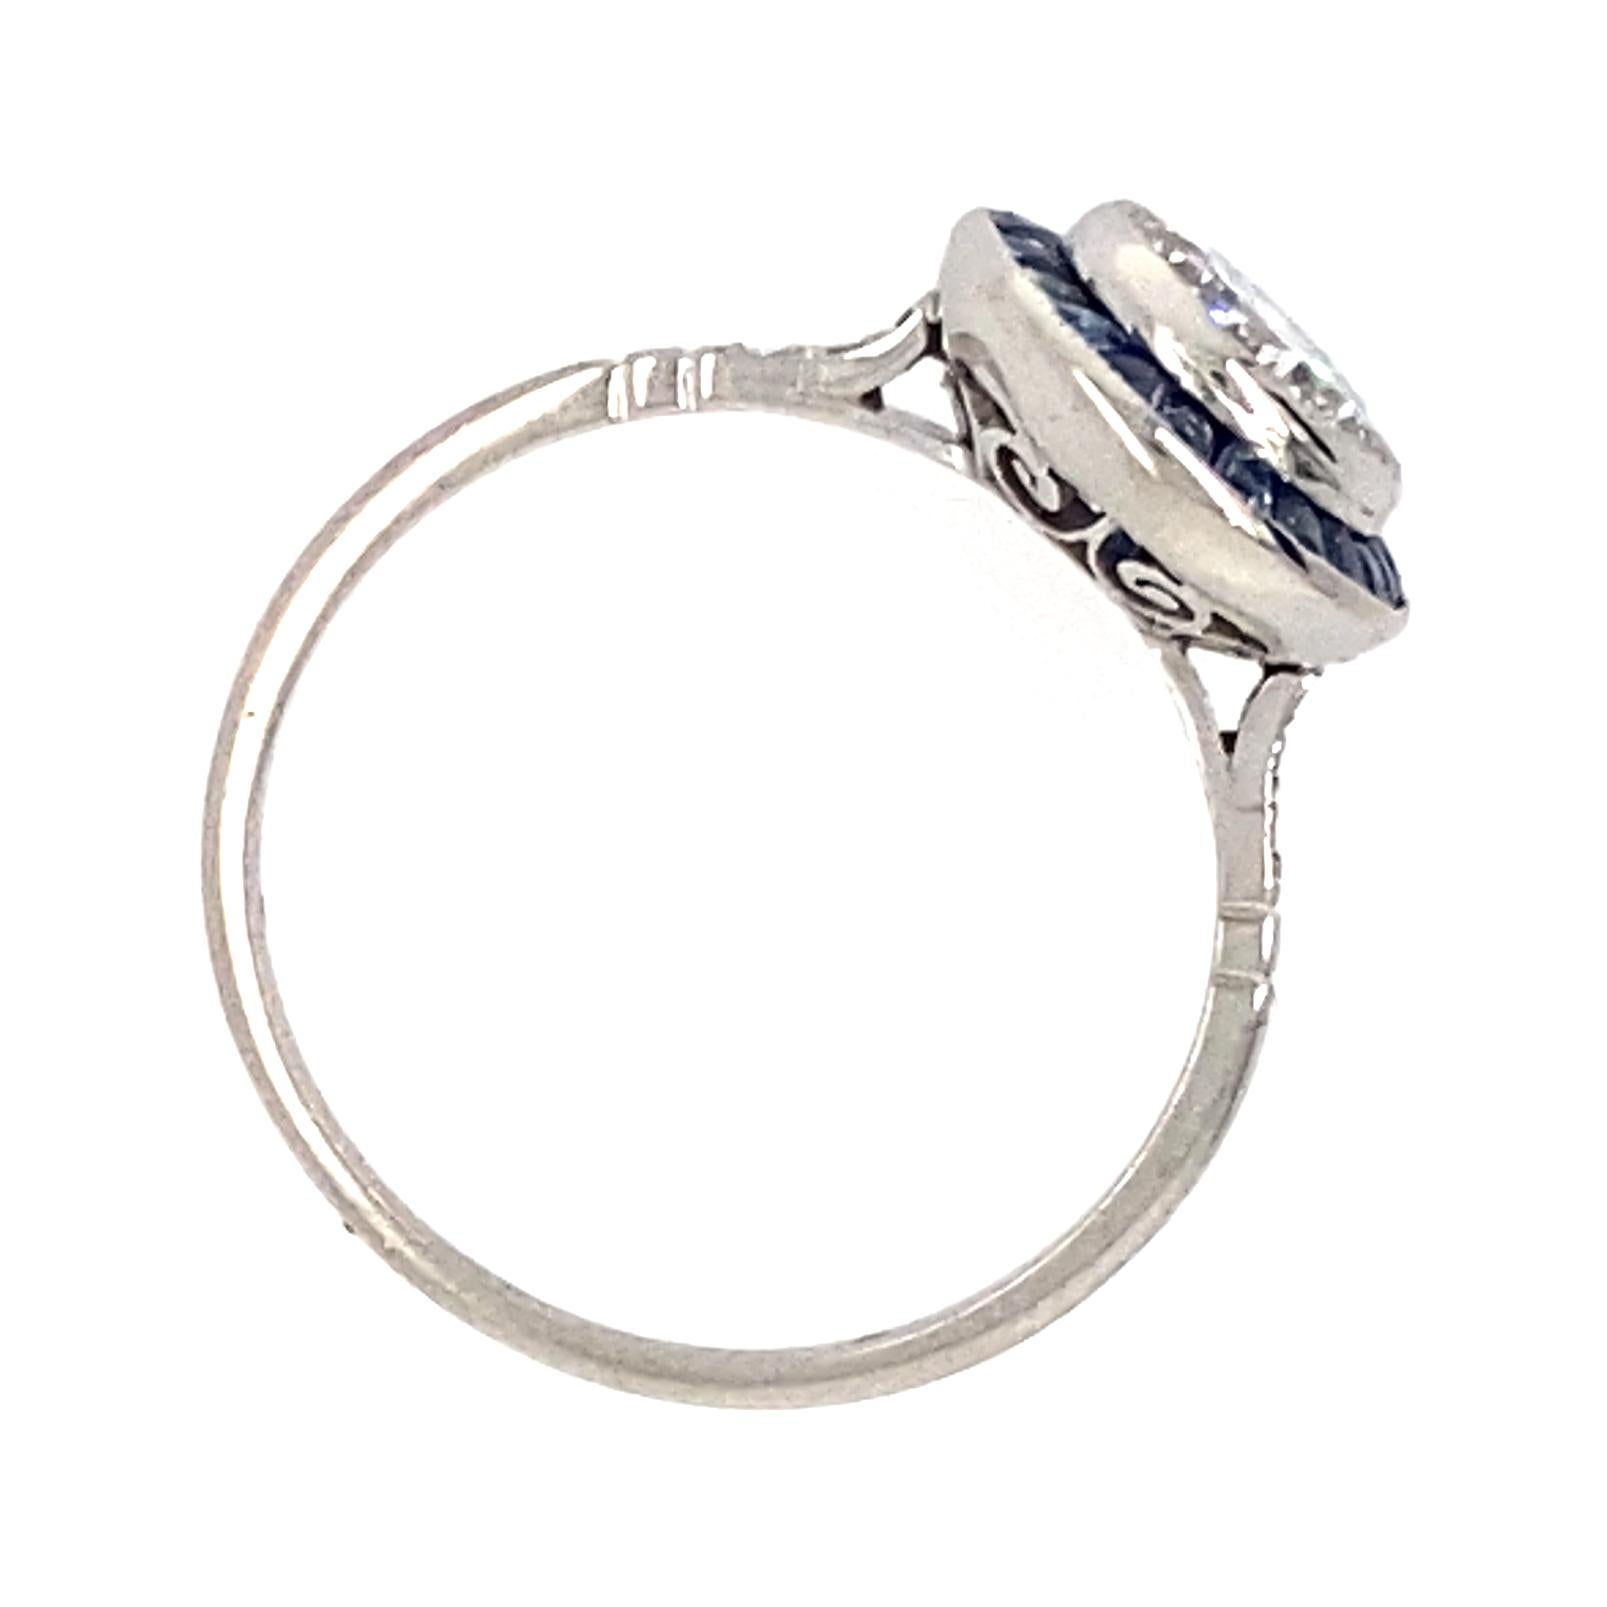 GIA Certified 1.19 Carat Diamond with Sapphire Halo in Deco-Style Platinum Ring 1